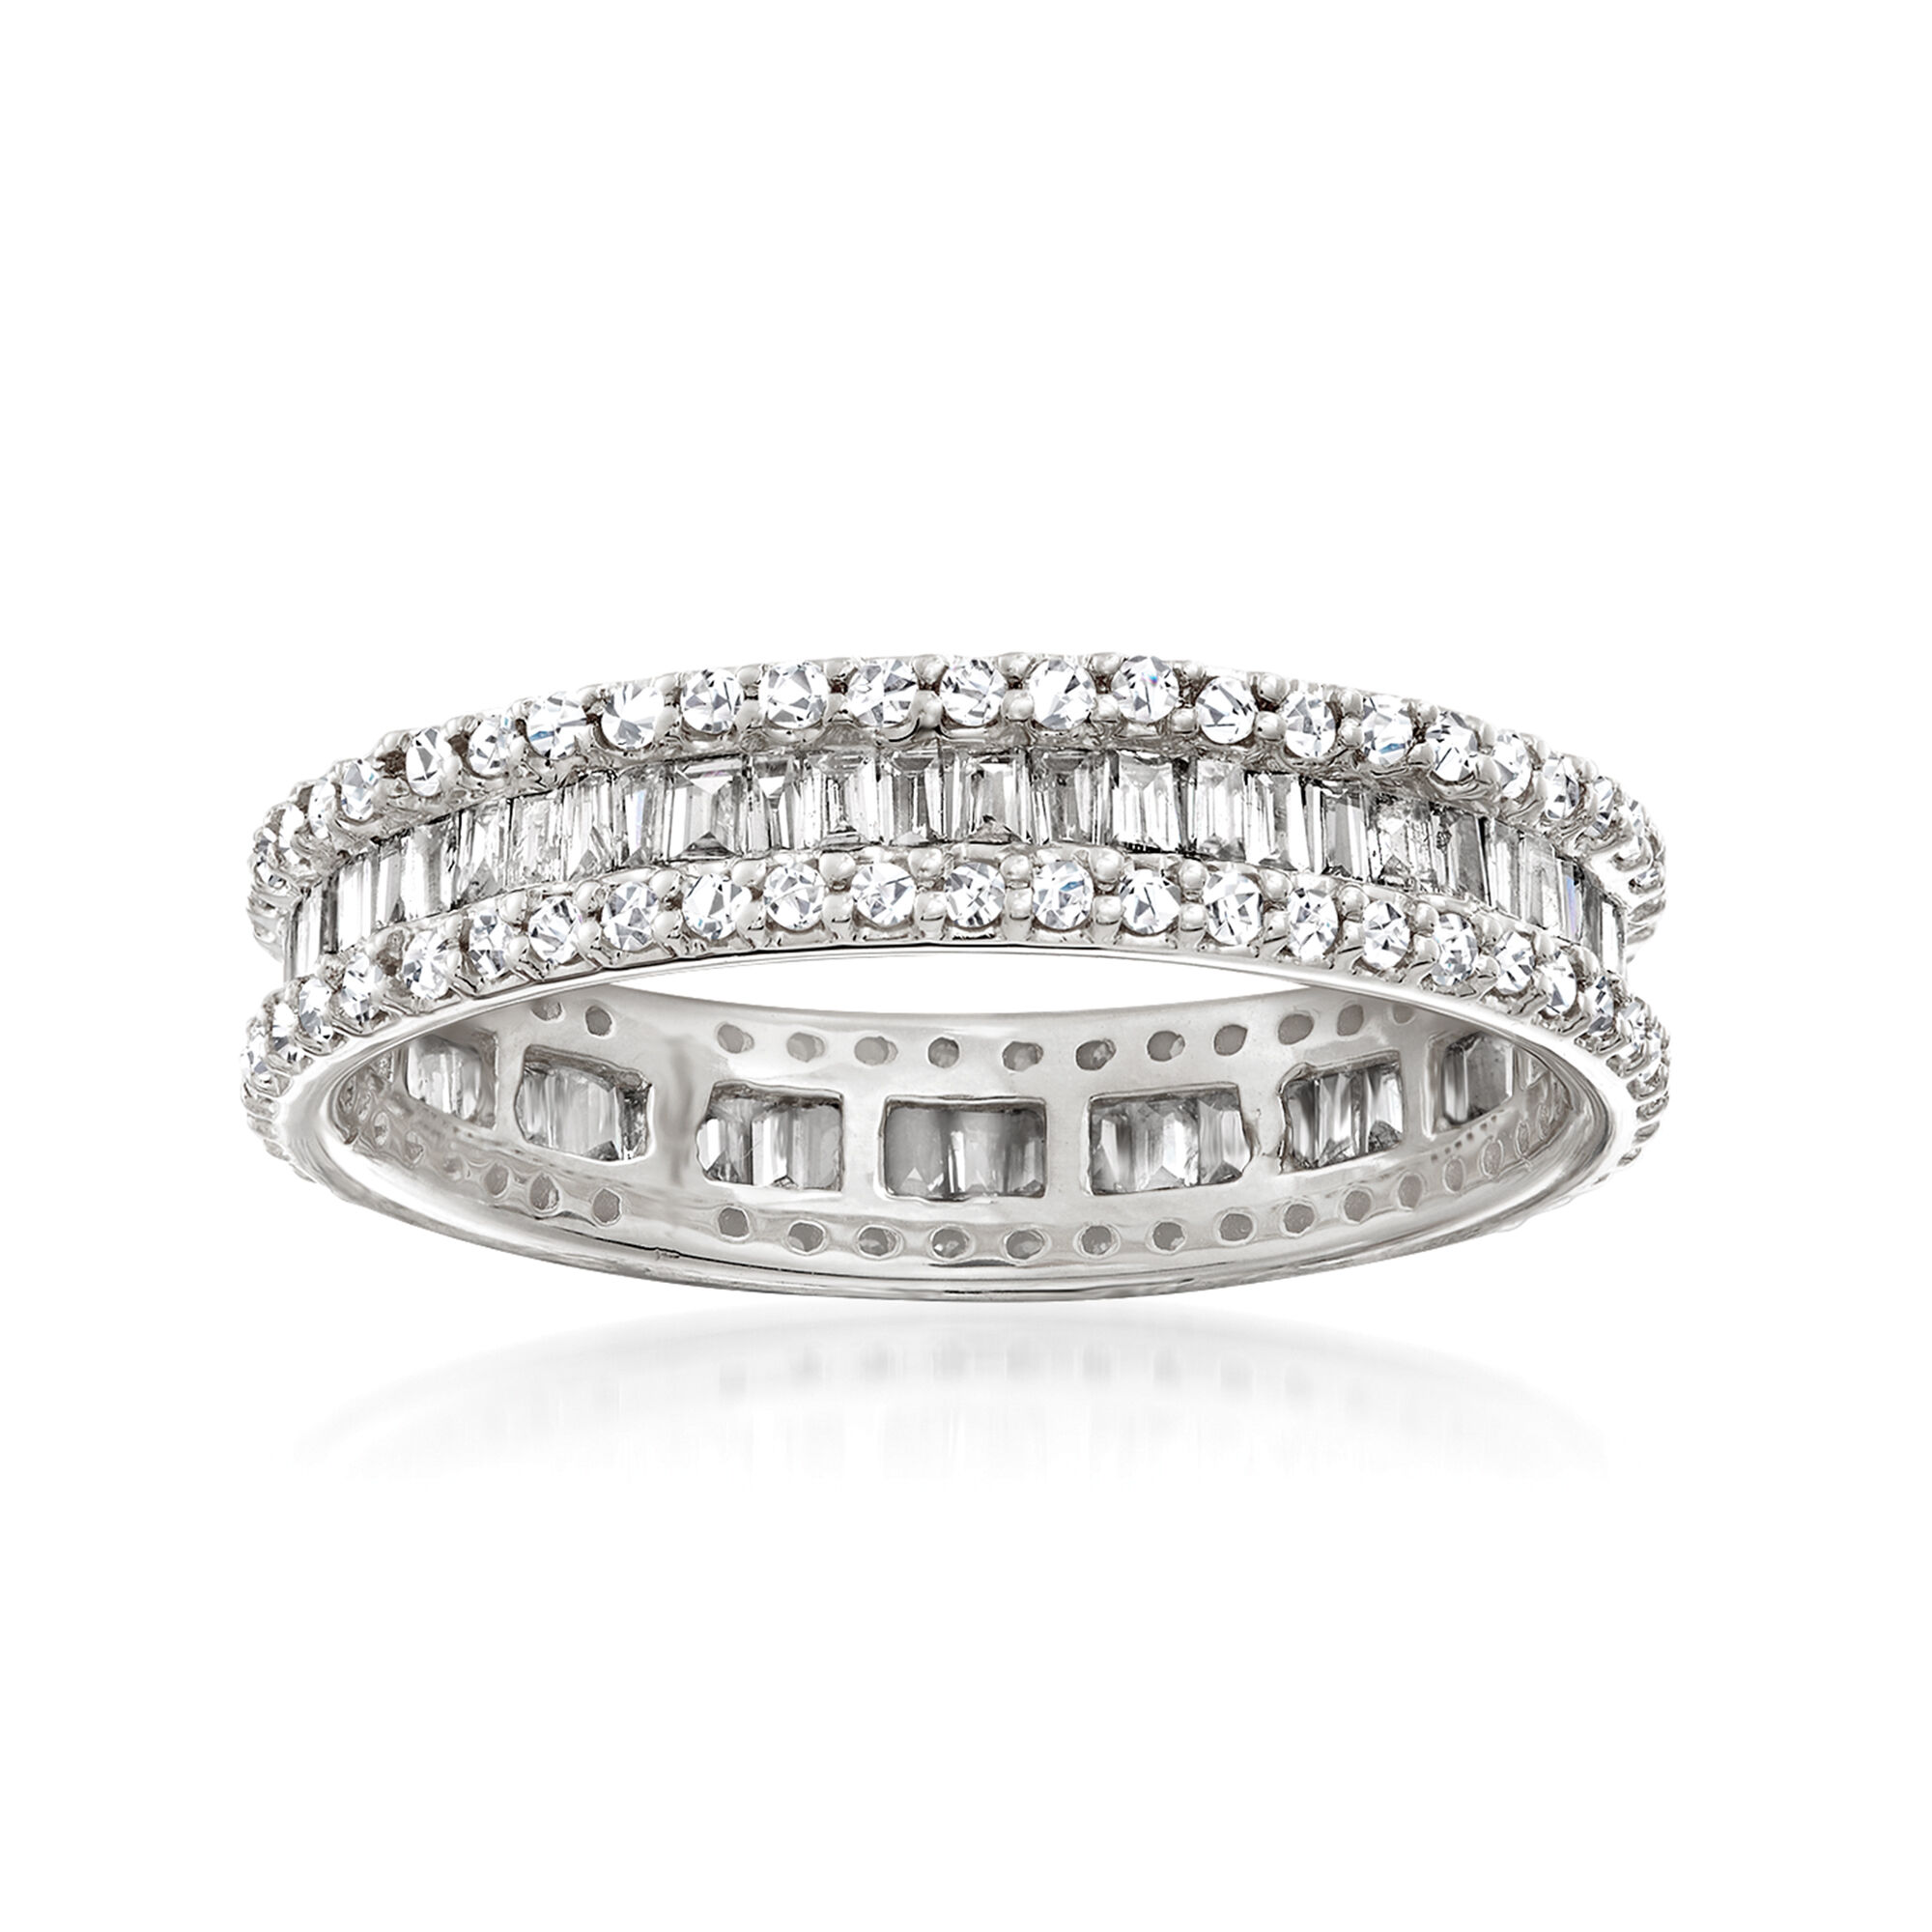 1.00 ct. tw Baguette and Round Diamond Eternity Ring in 14kt White 